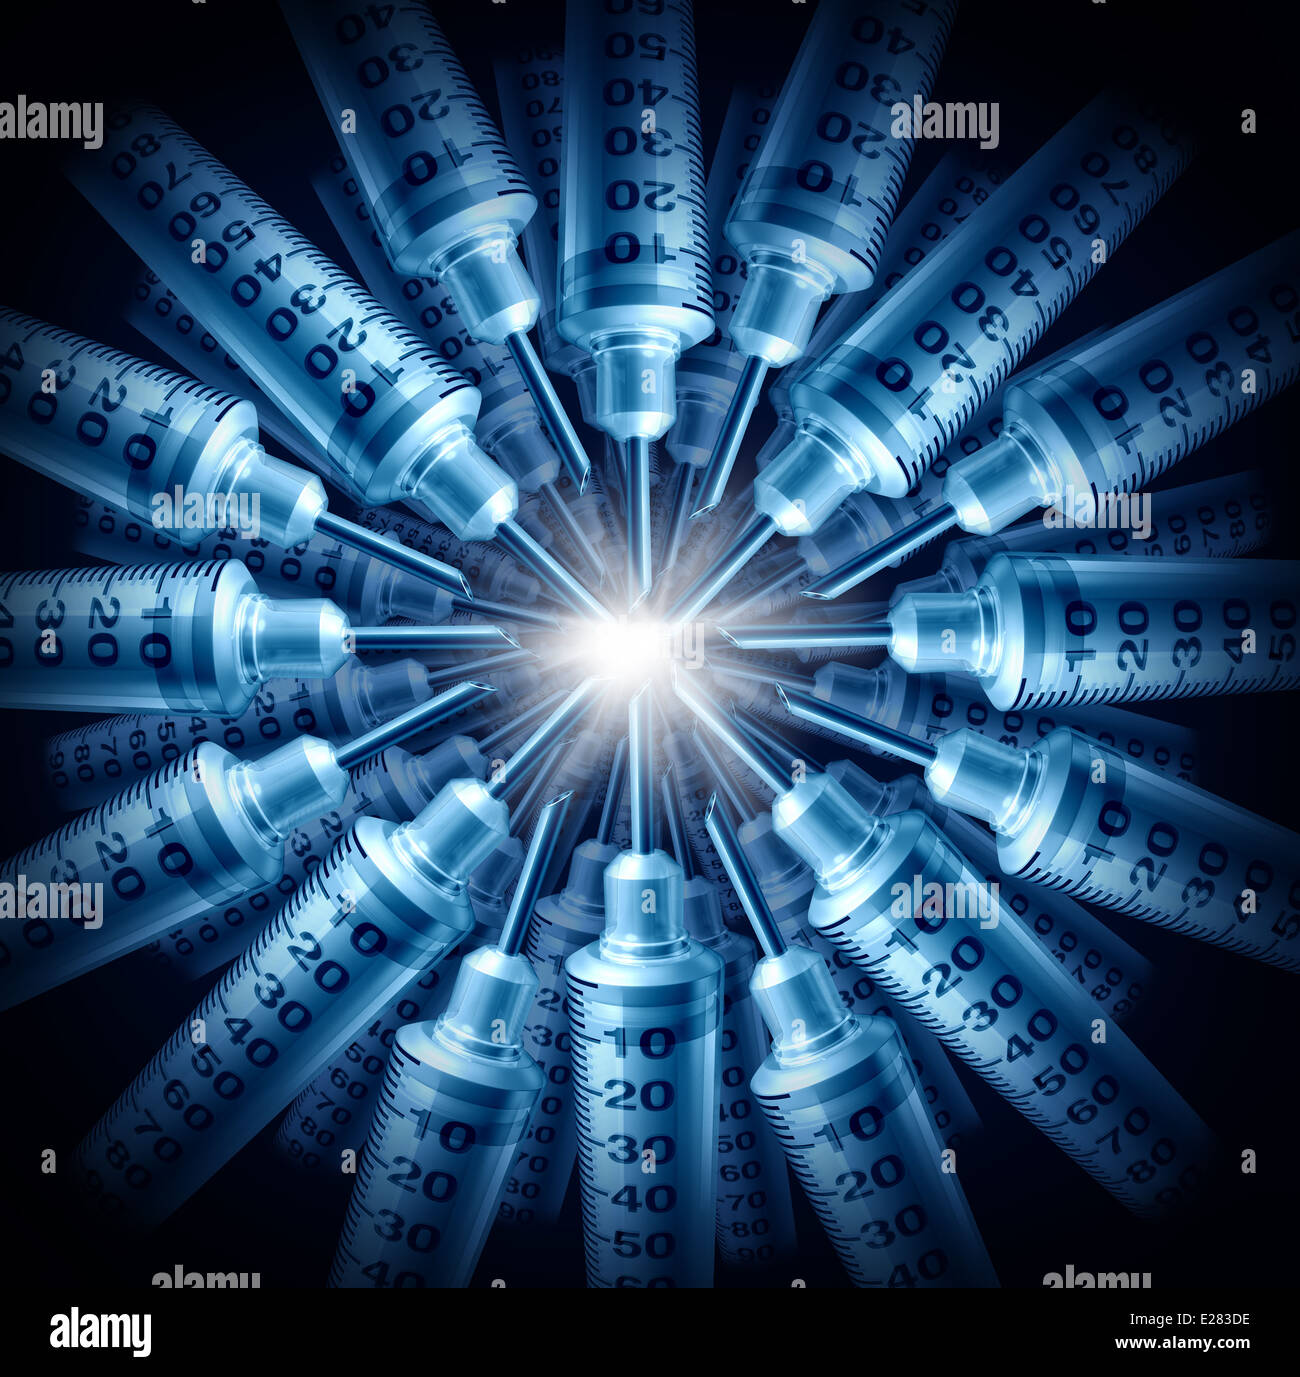 Immunizations and vaccination protection for influenza or other diseases with a group of syringes in a glowing radial pattern as a metaphor for medical health care disease control with medicine. Stock Photo